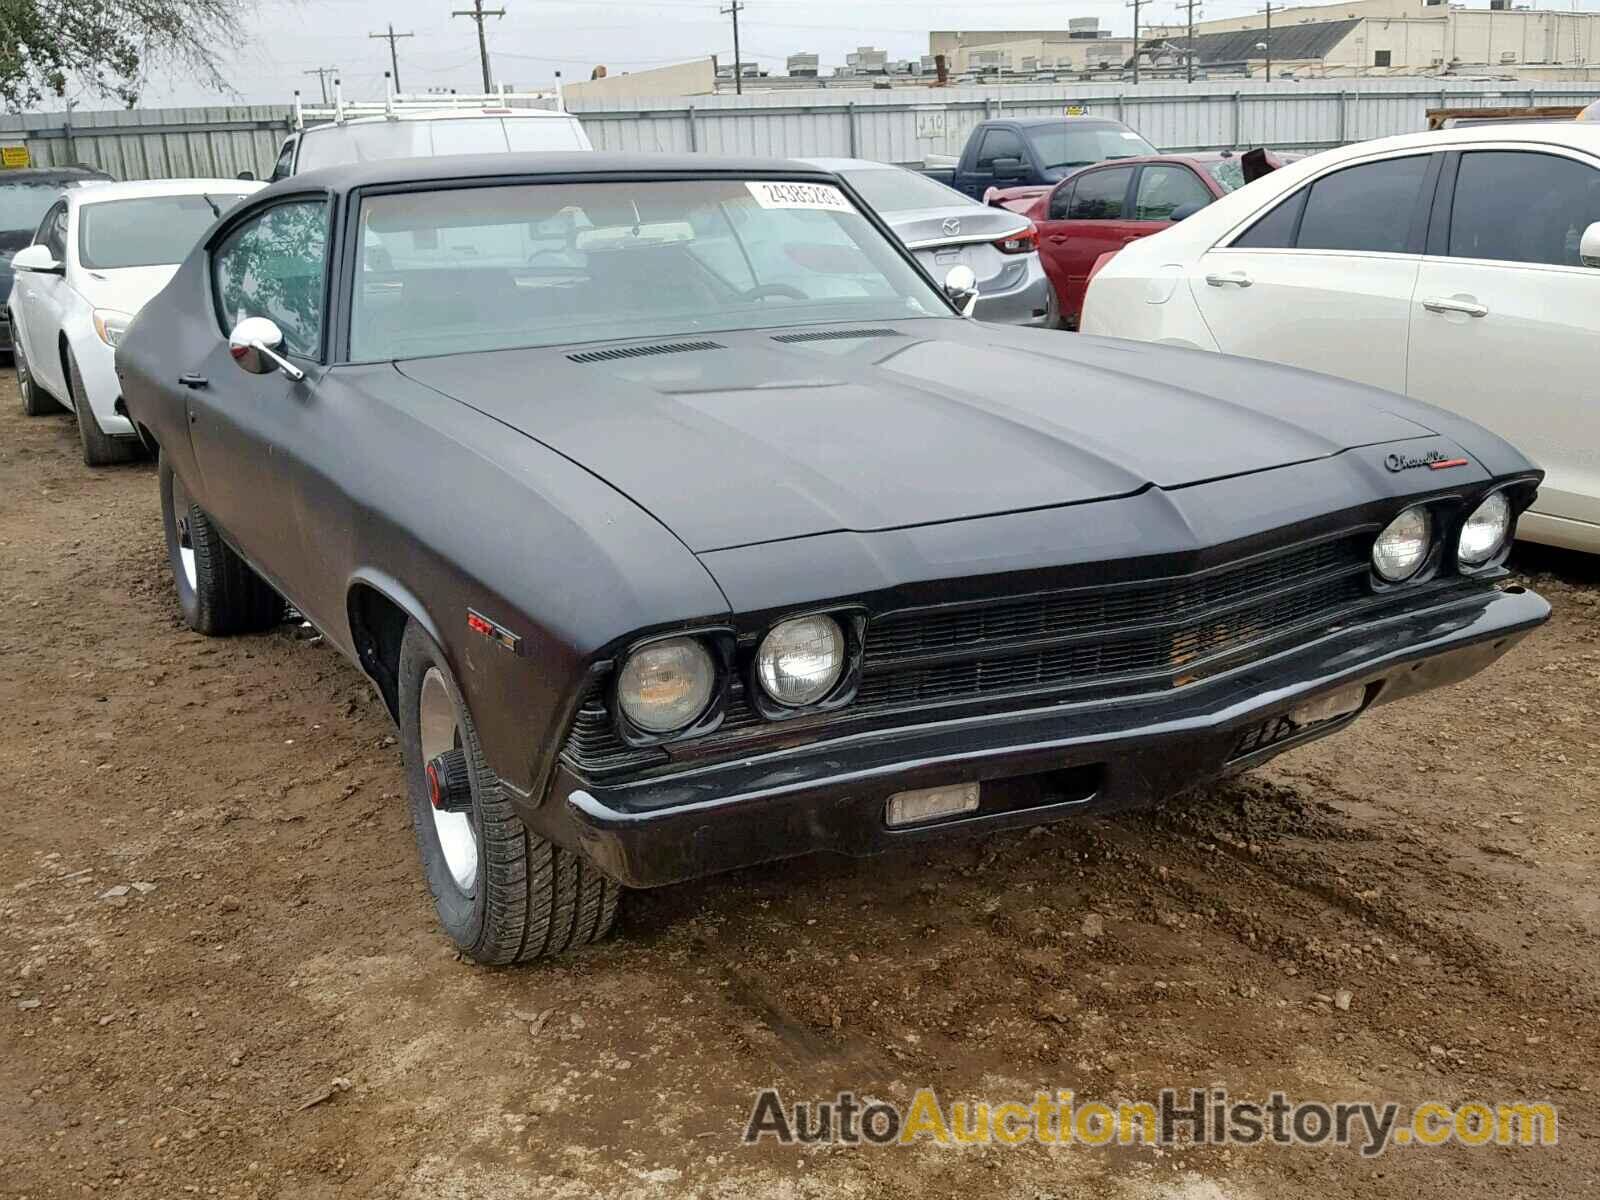 1969 CHEVROLET CHEVELL SS, 136379A347727